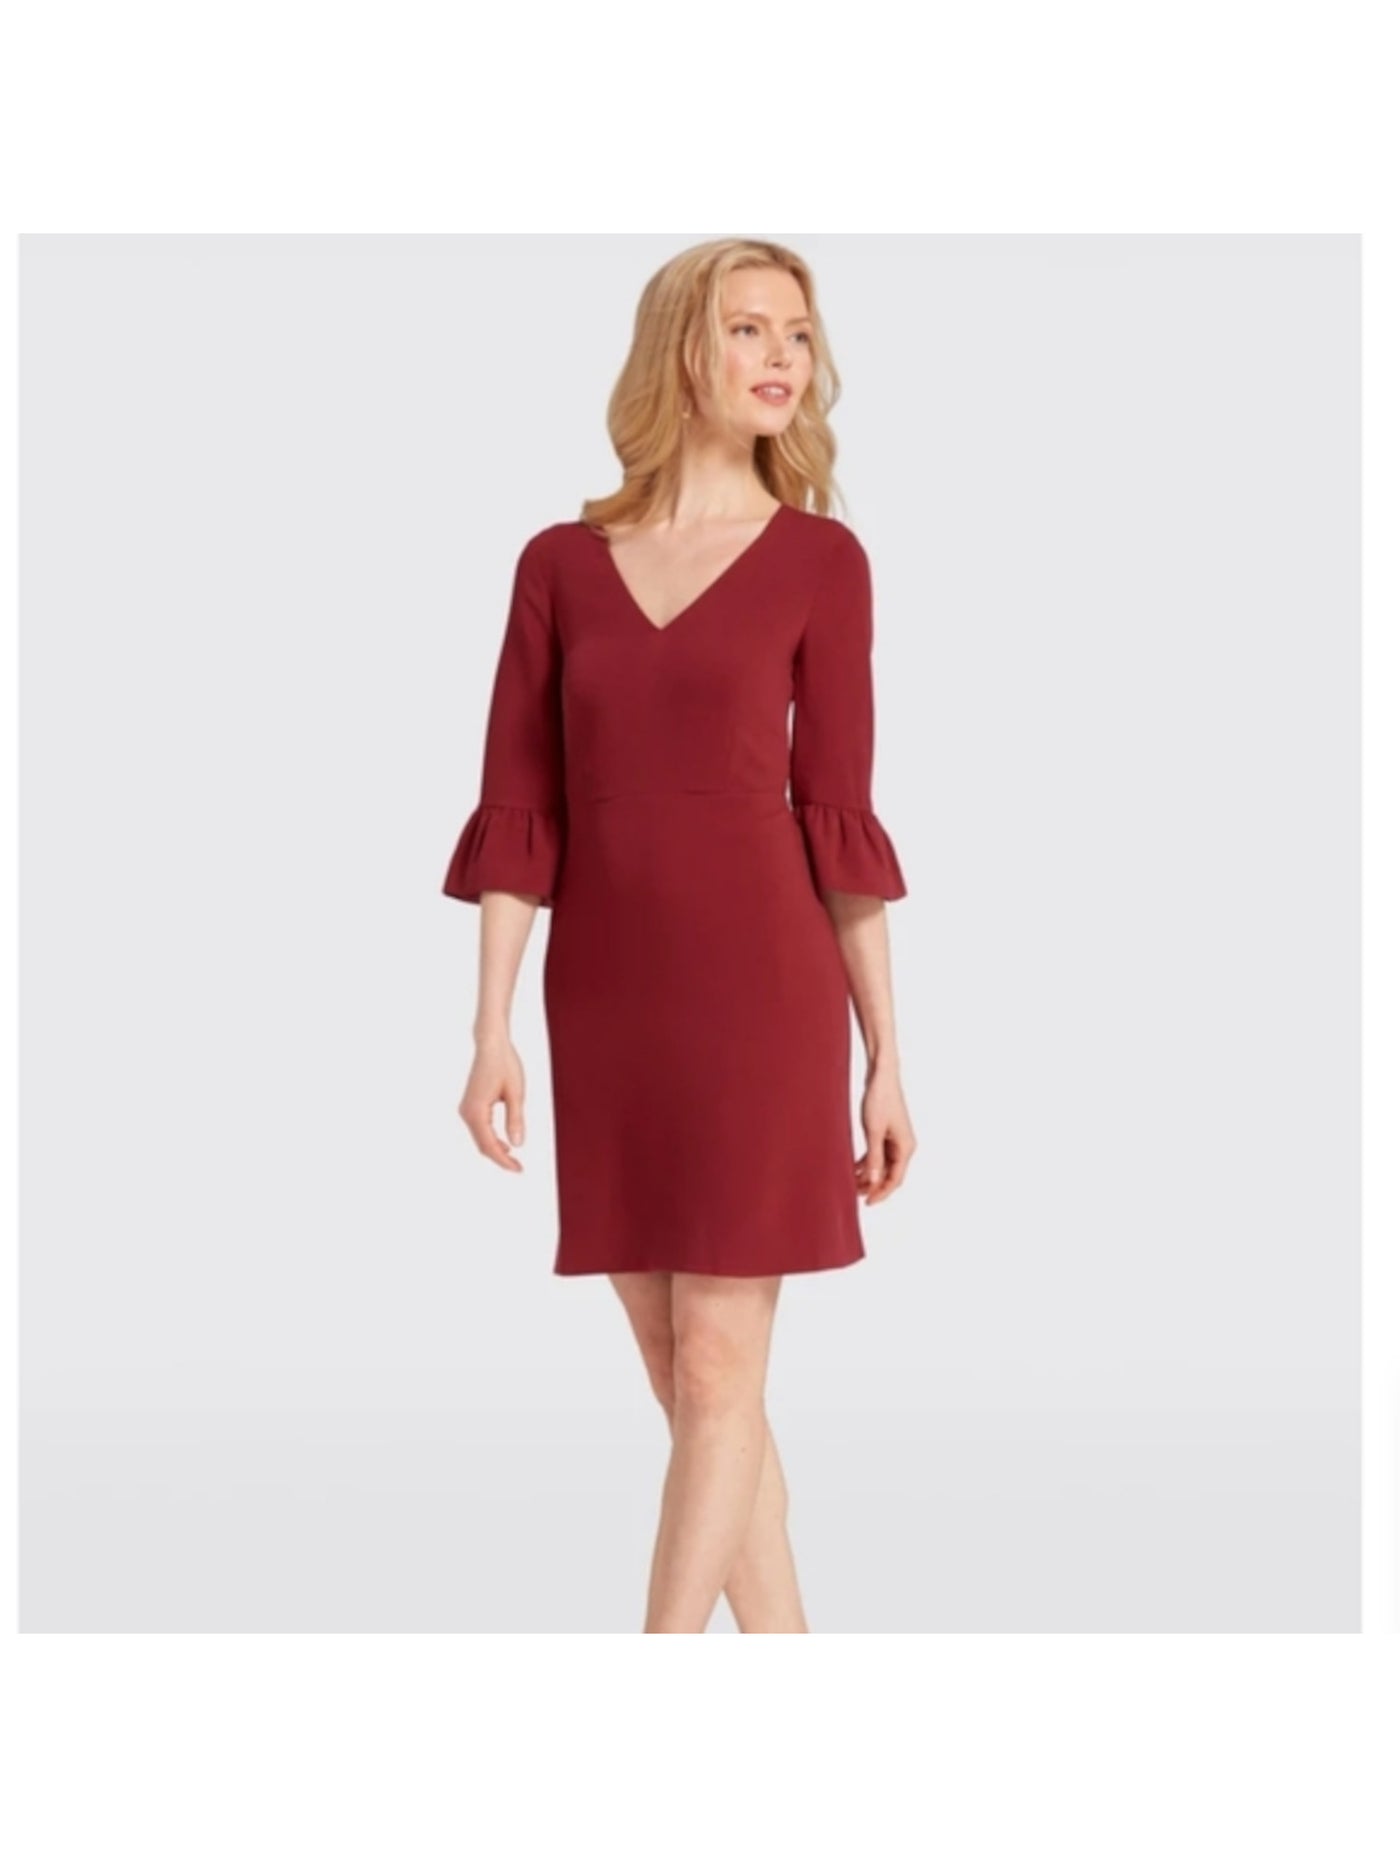 DKNY Womens Burgundy Stretch Zippered Unlined Ruffled Tiered Cuffs Scuba Crepe 3/4 Sleeve V Neck Above The Knee Wear To Work Sheath Dress 6